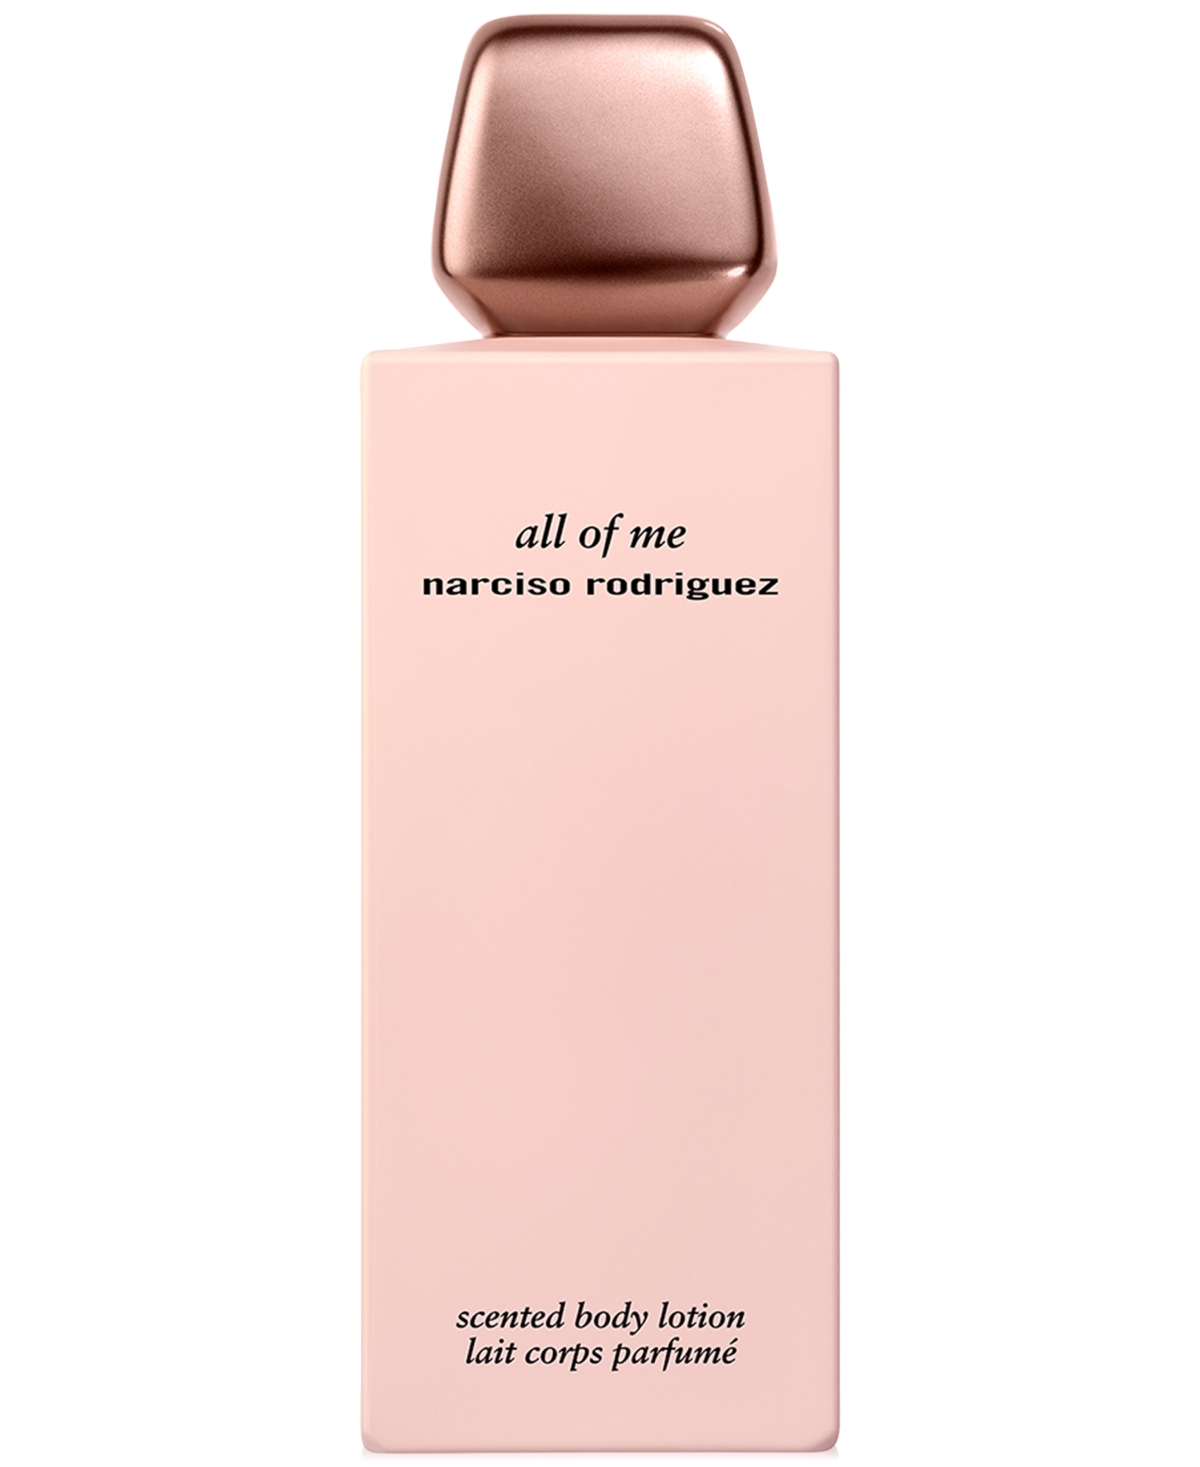 Narciso Rodriguez All Of Me Scented Body Lotion, 6.7 Oz.